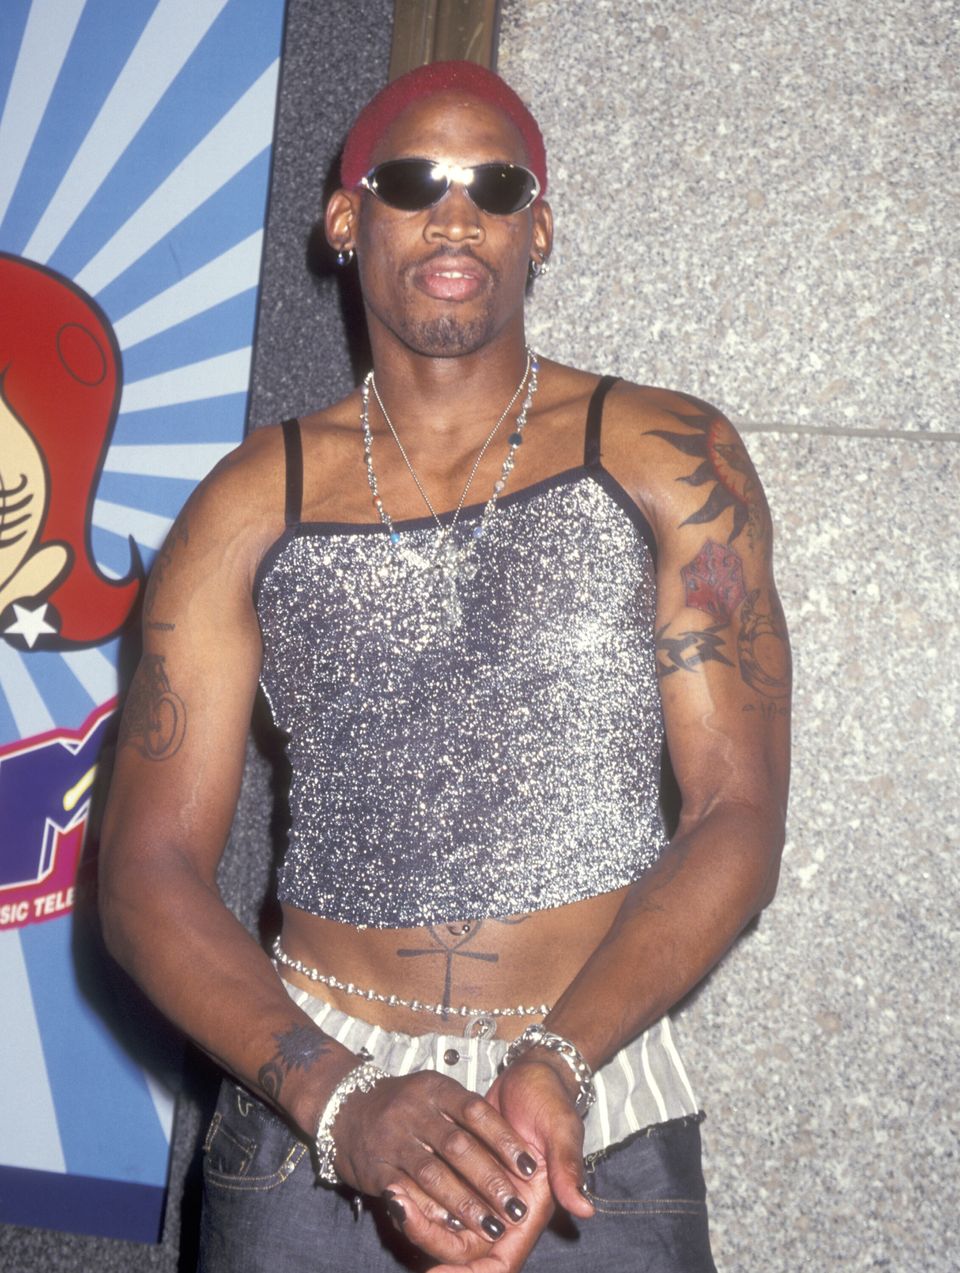 Create your own Dennis Rodman hairstyle with this little coloring